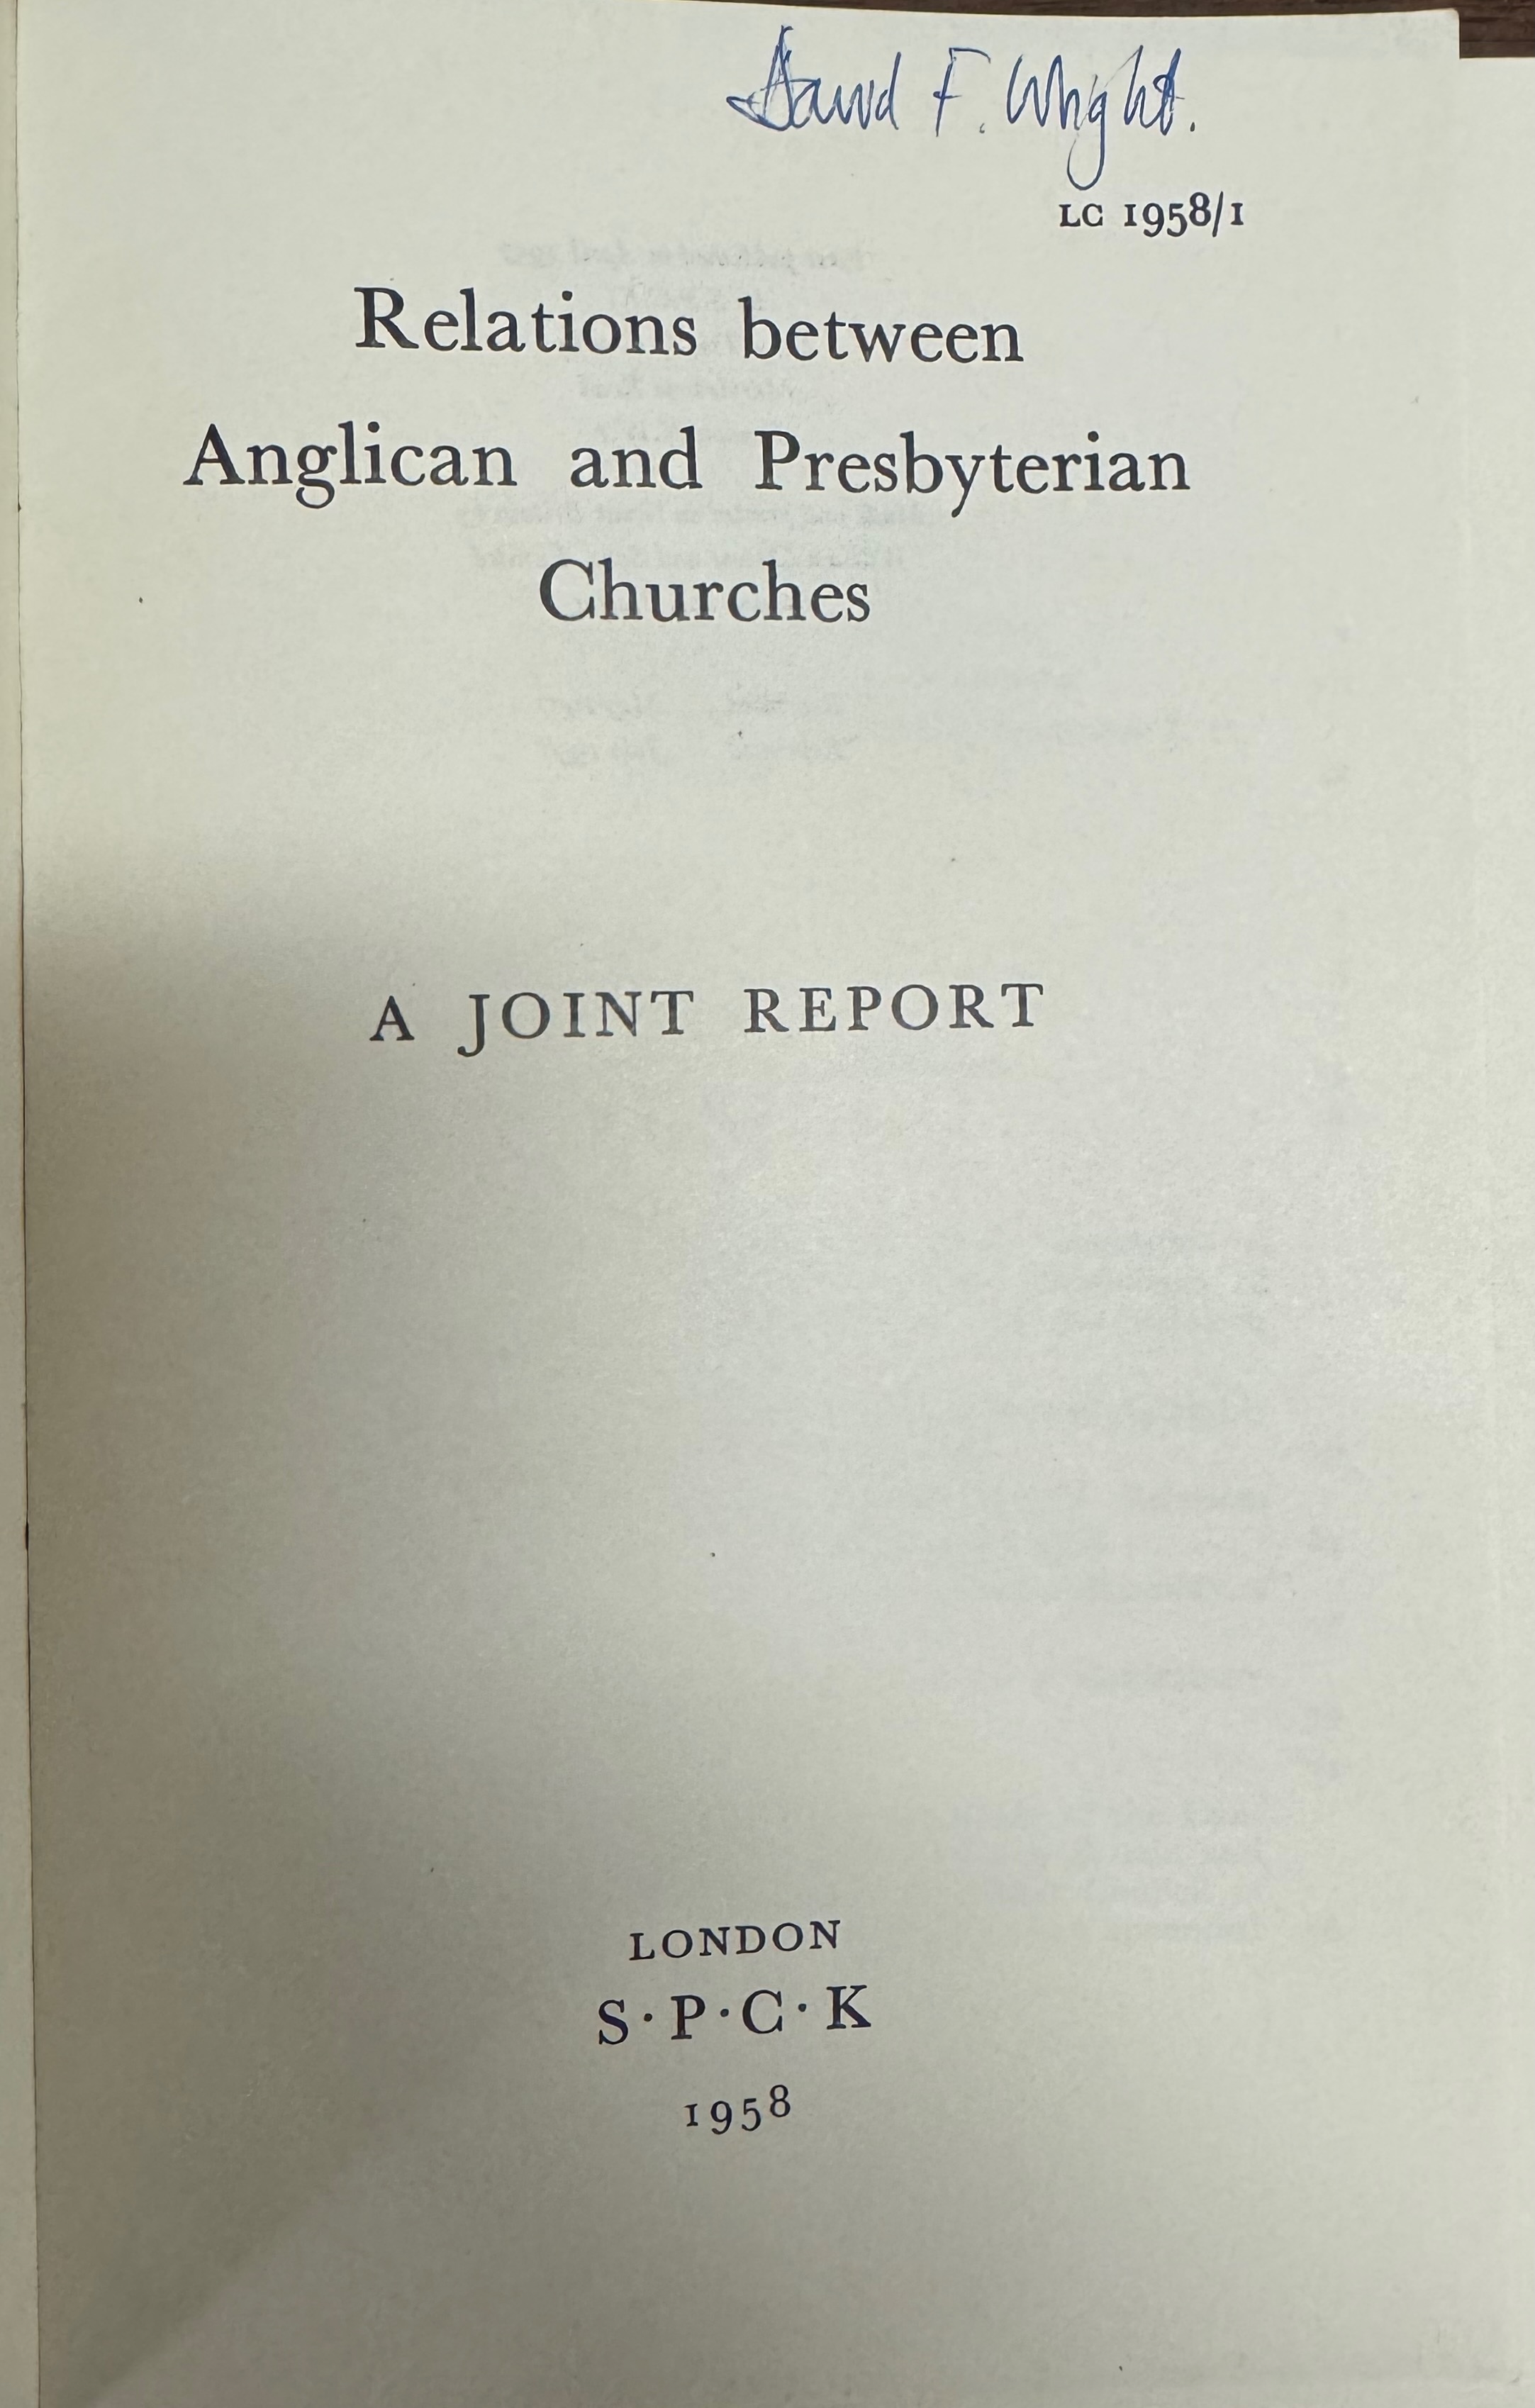 1958-TFT-6 title page